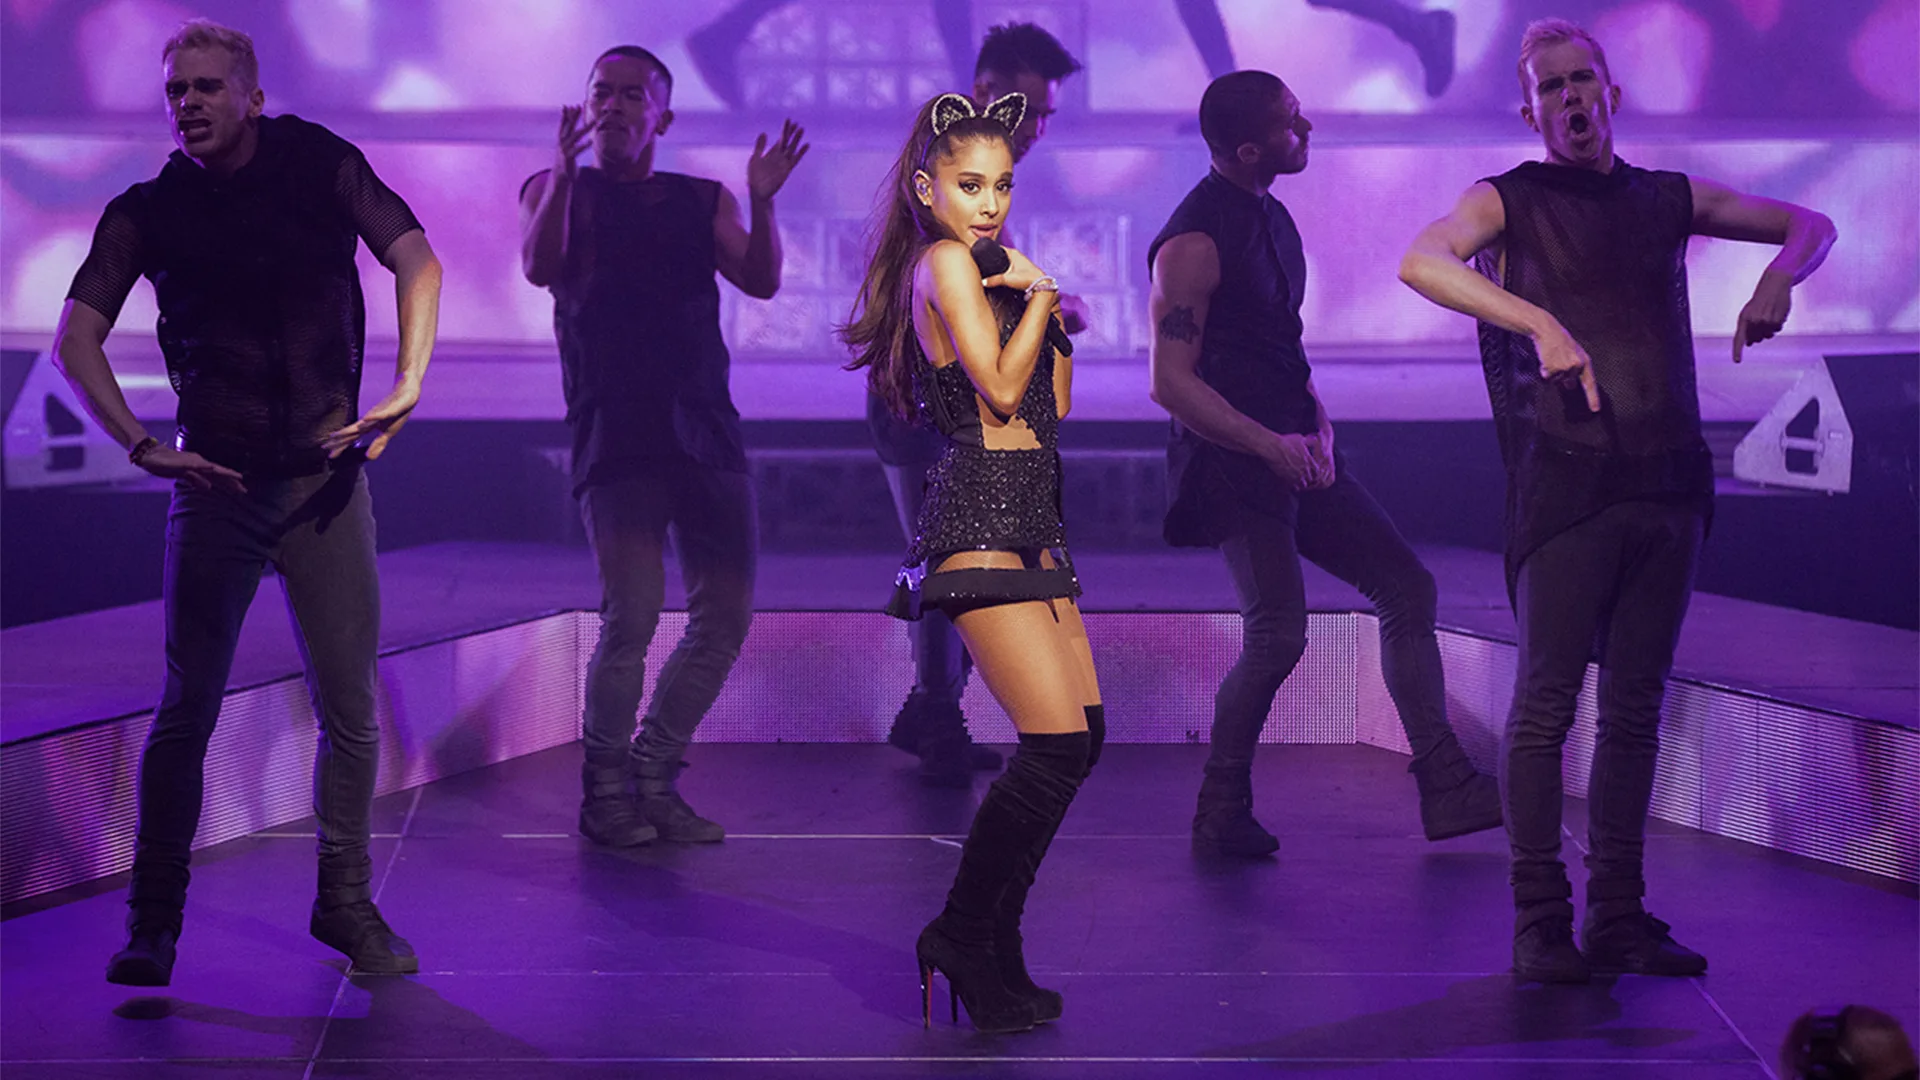 Ariana performing on stage with back up dancers